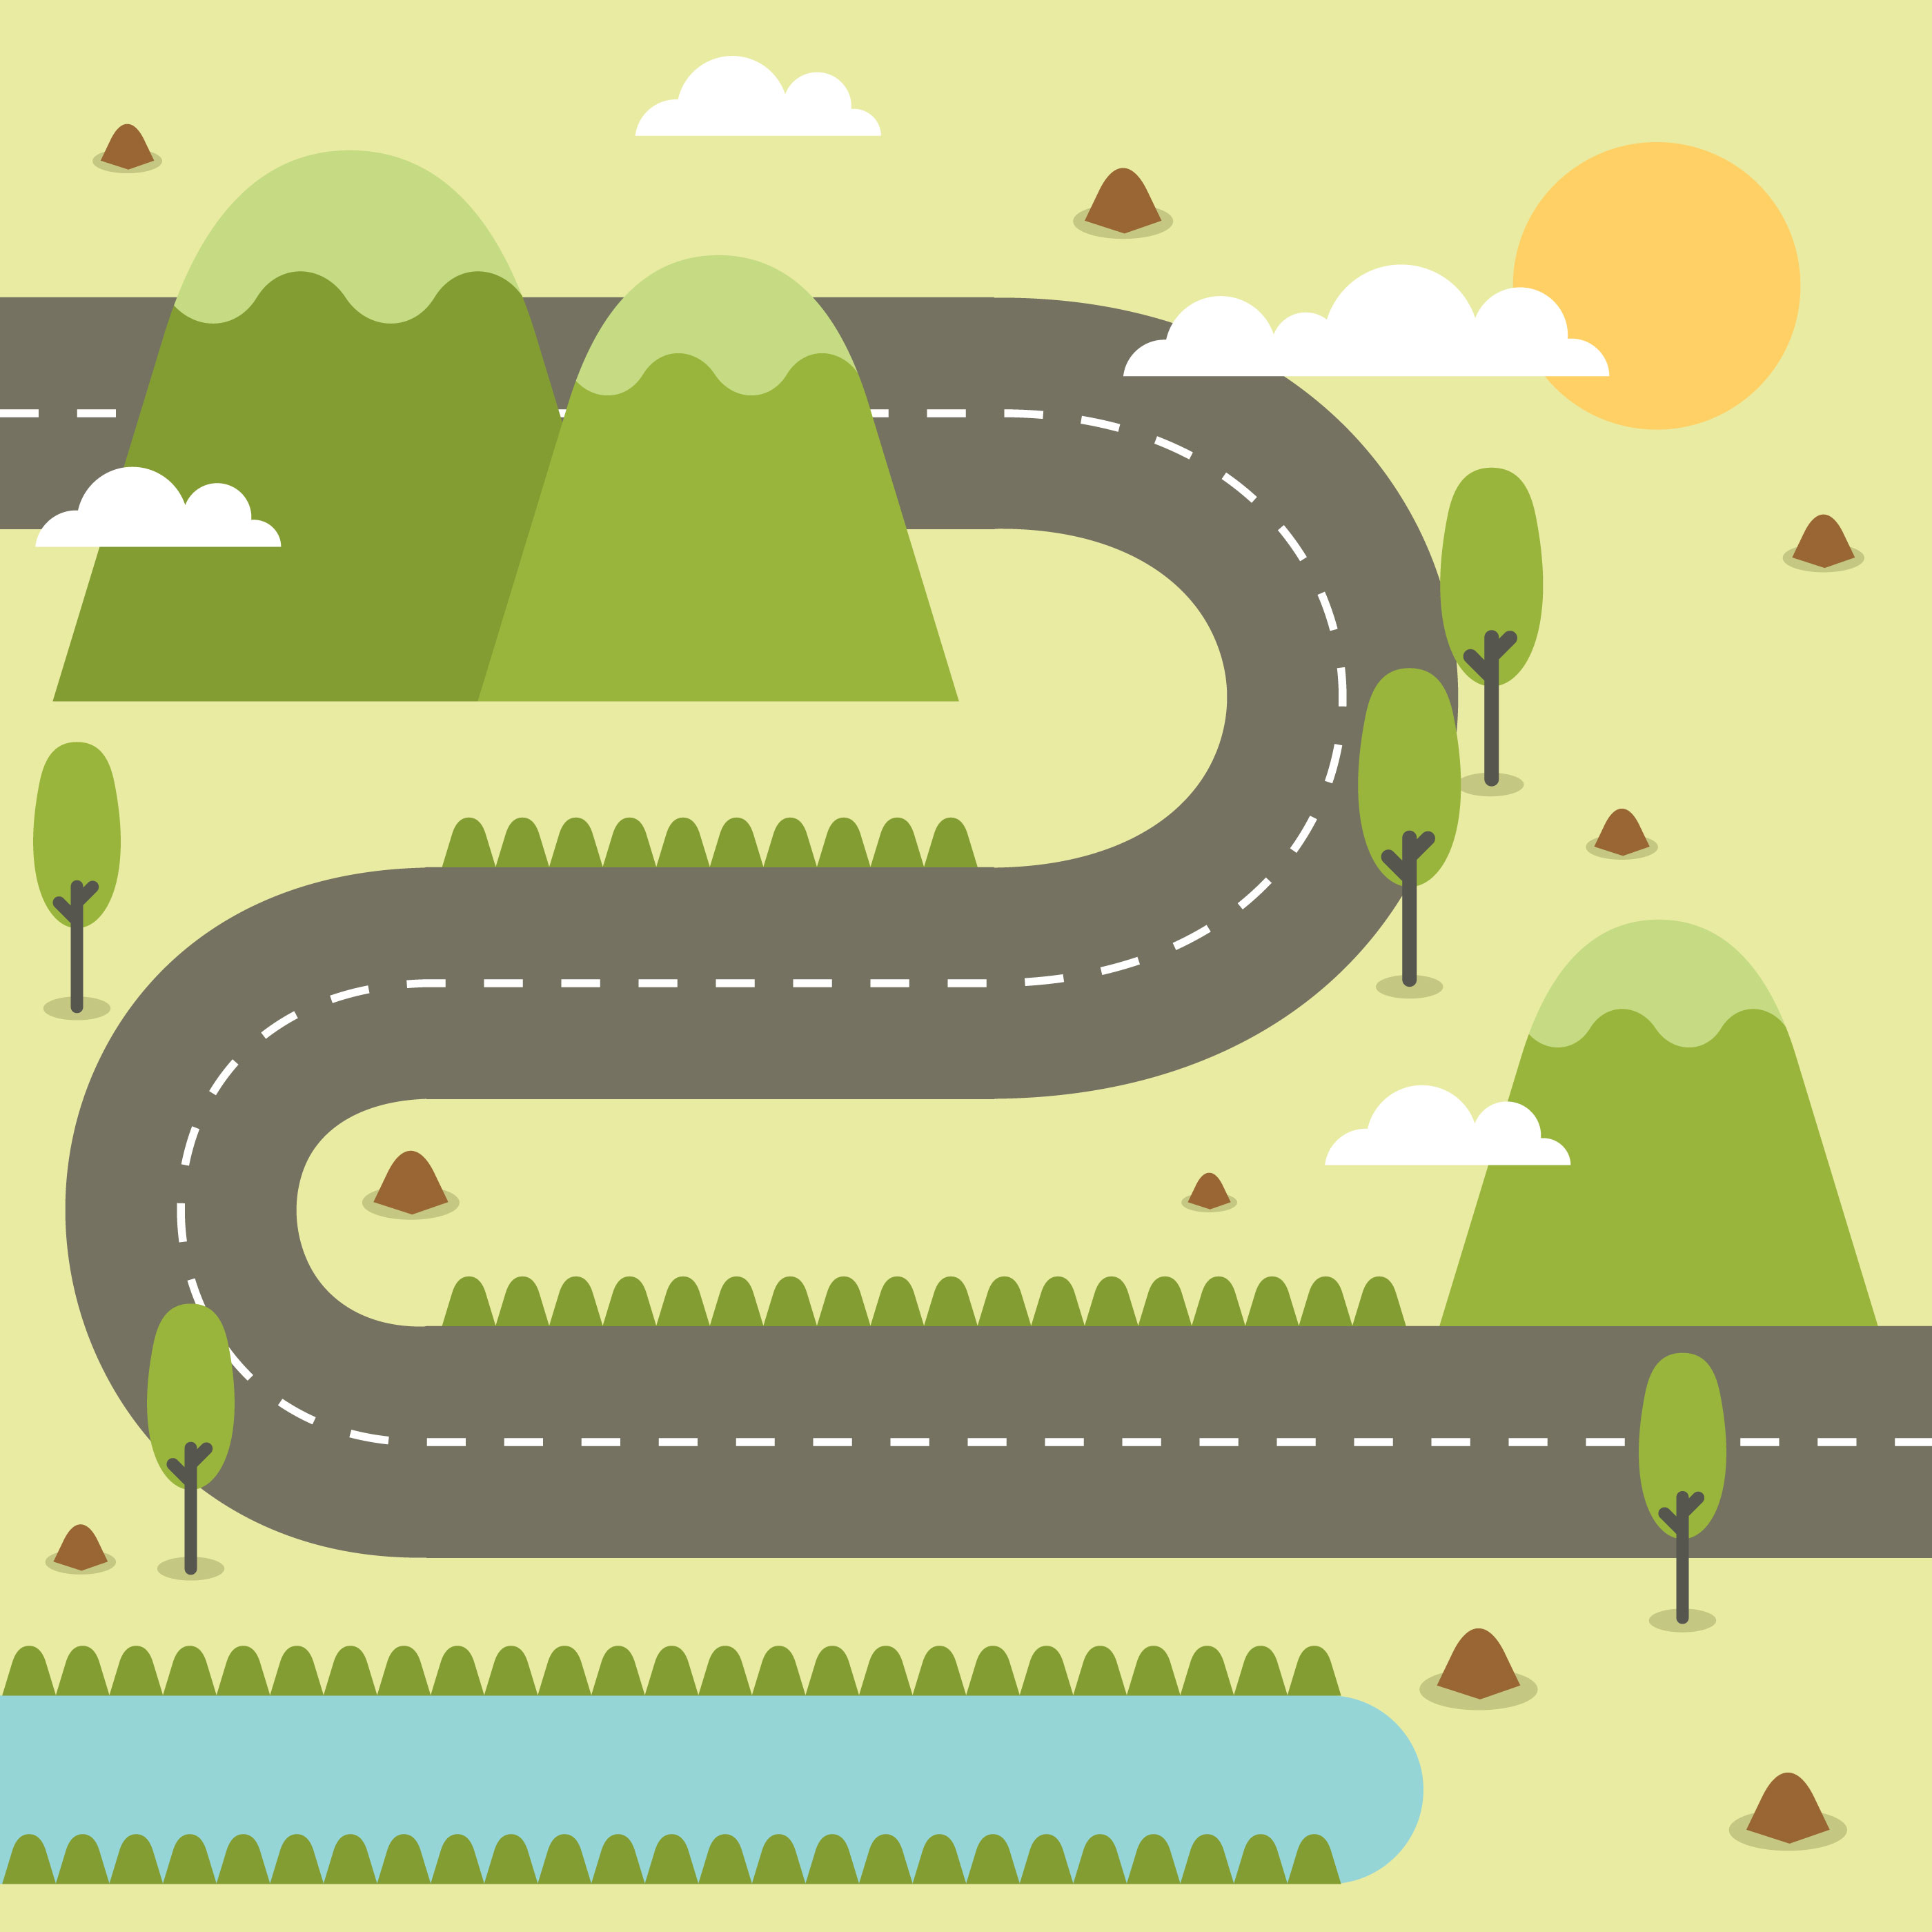 Road Map Vector (4613 Free Downloads)